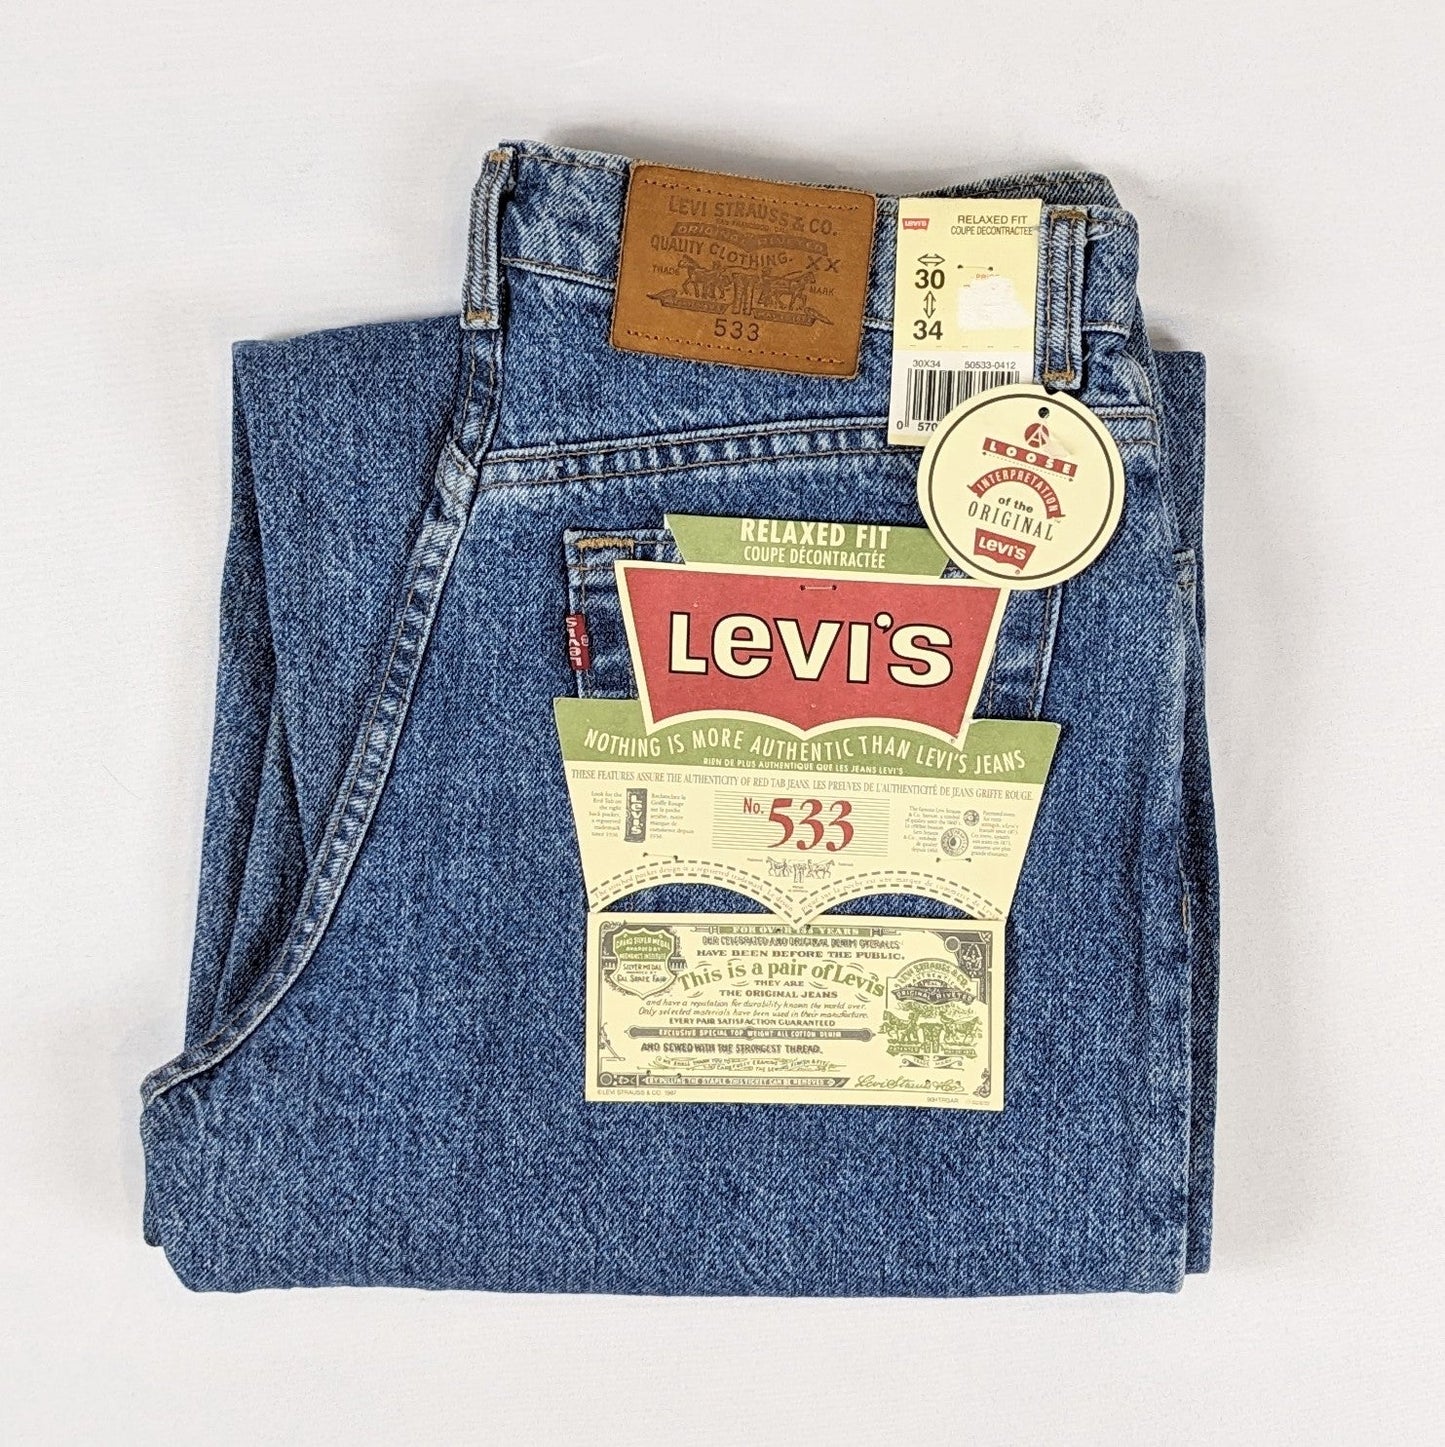 Levis jeans vintage 90s deadstock made in Canada size 30x34